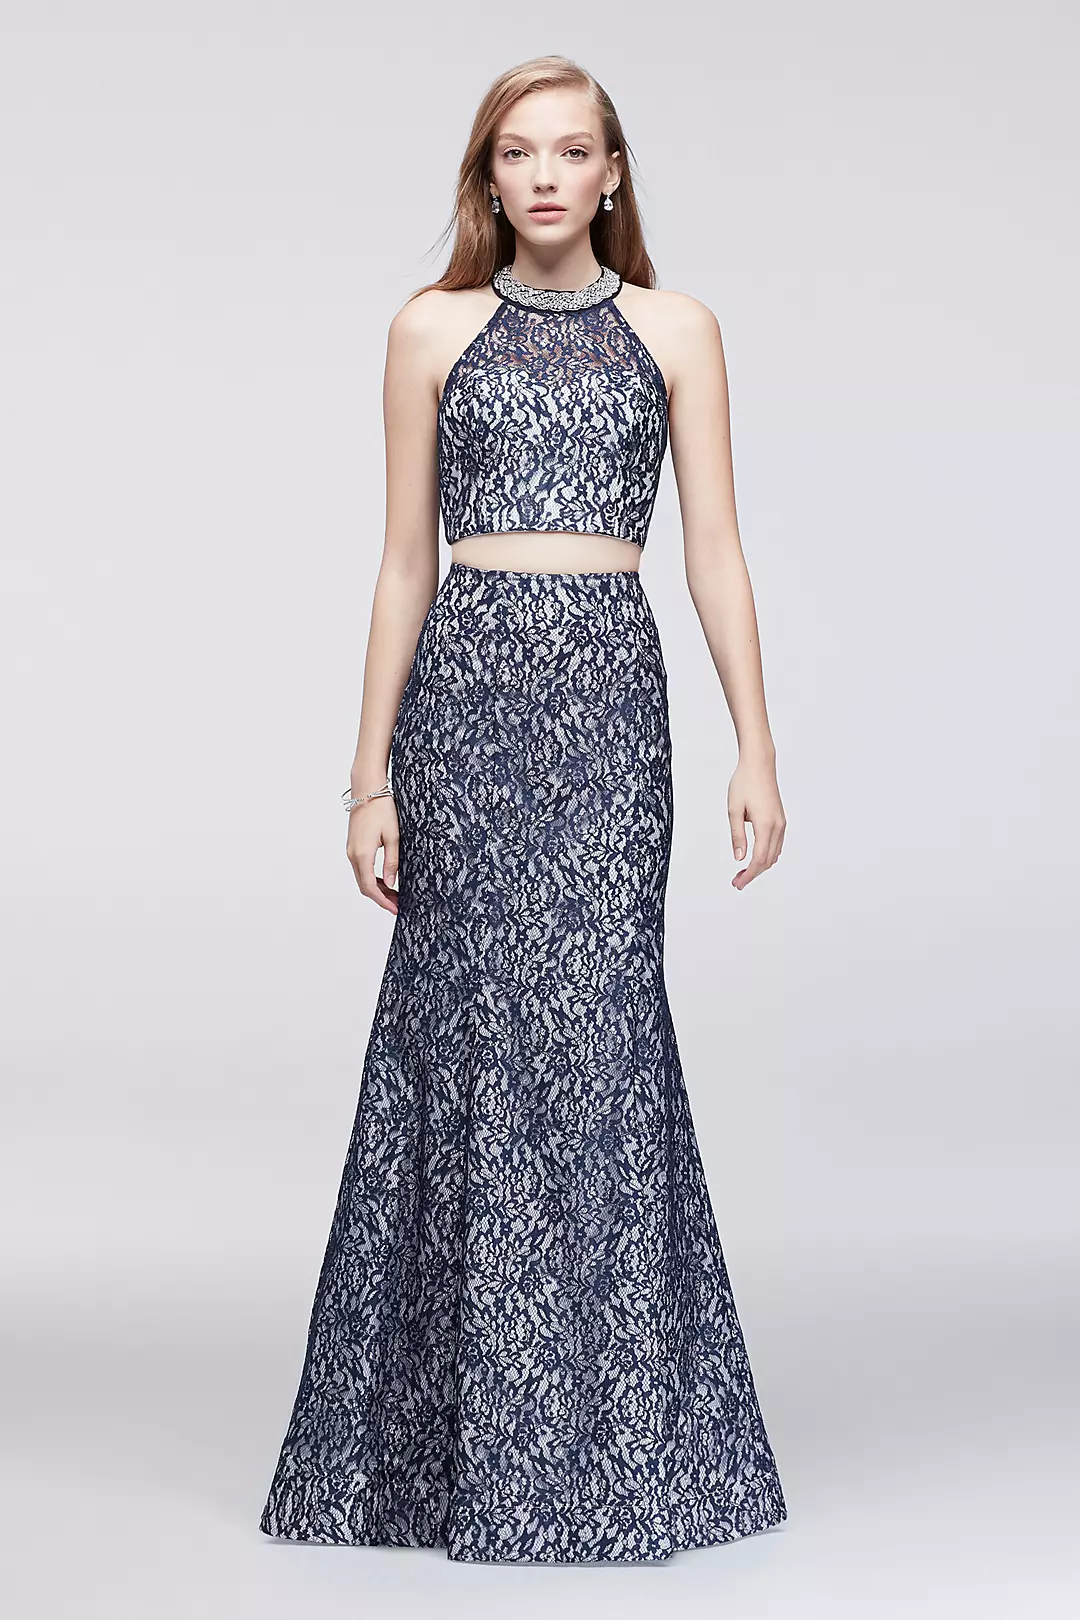 Metallic Lace Two-Piece Dress with Beaded Neckline Image 1